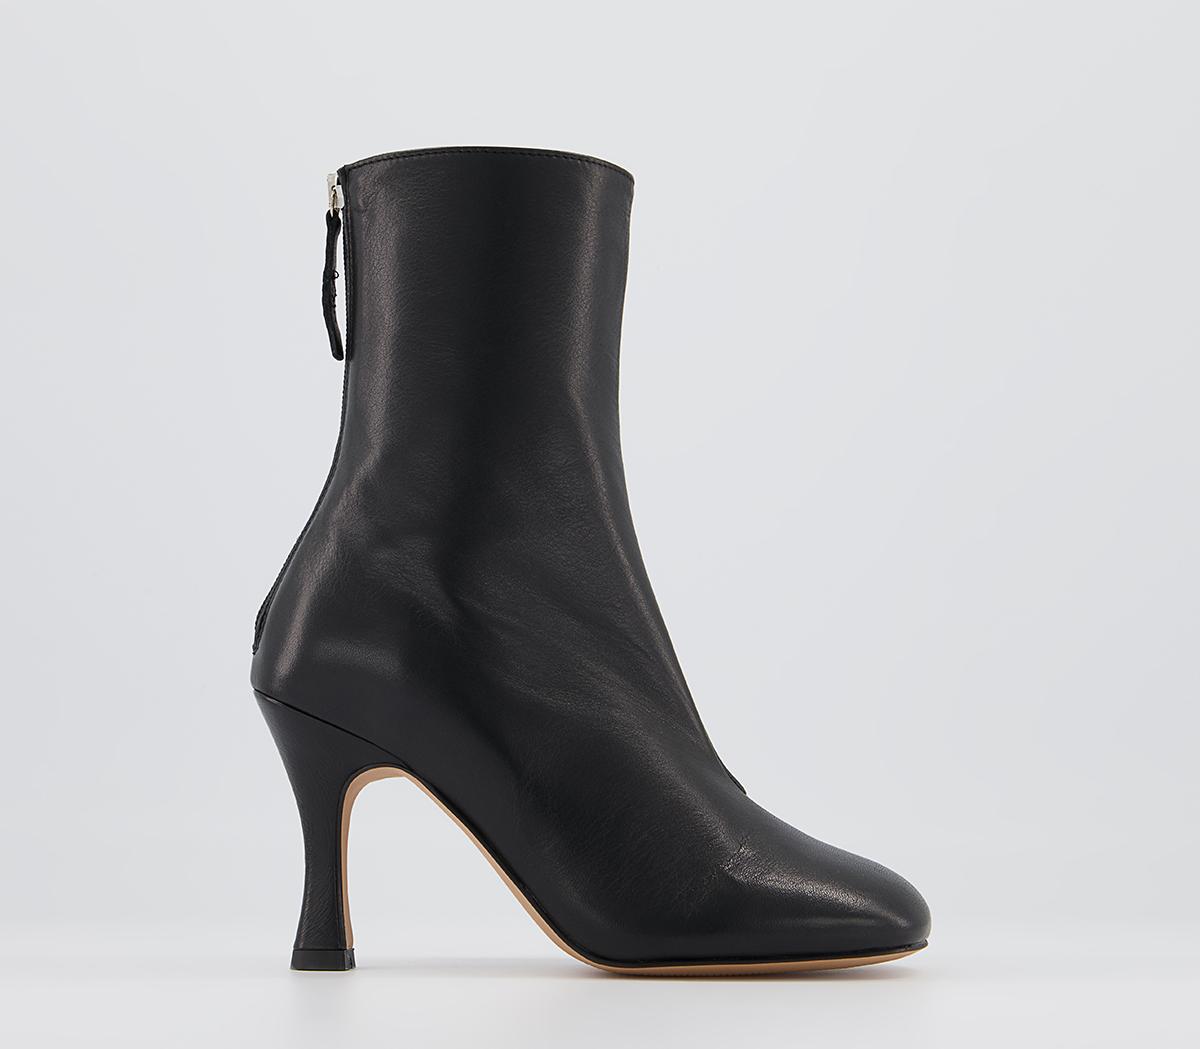 OFFICE Avril Heeled Boots Black Leather - Women's Boots